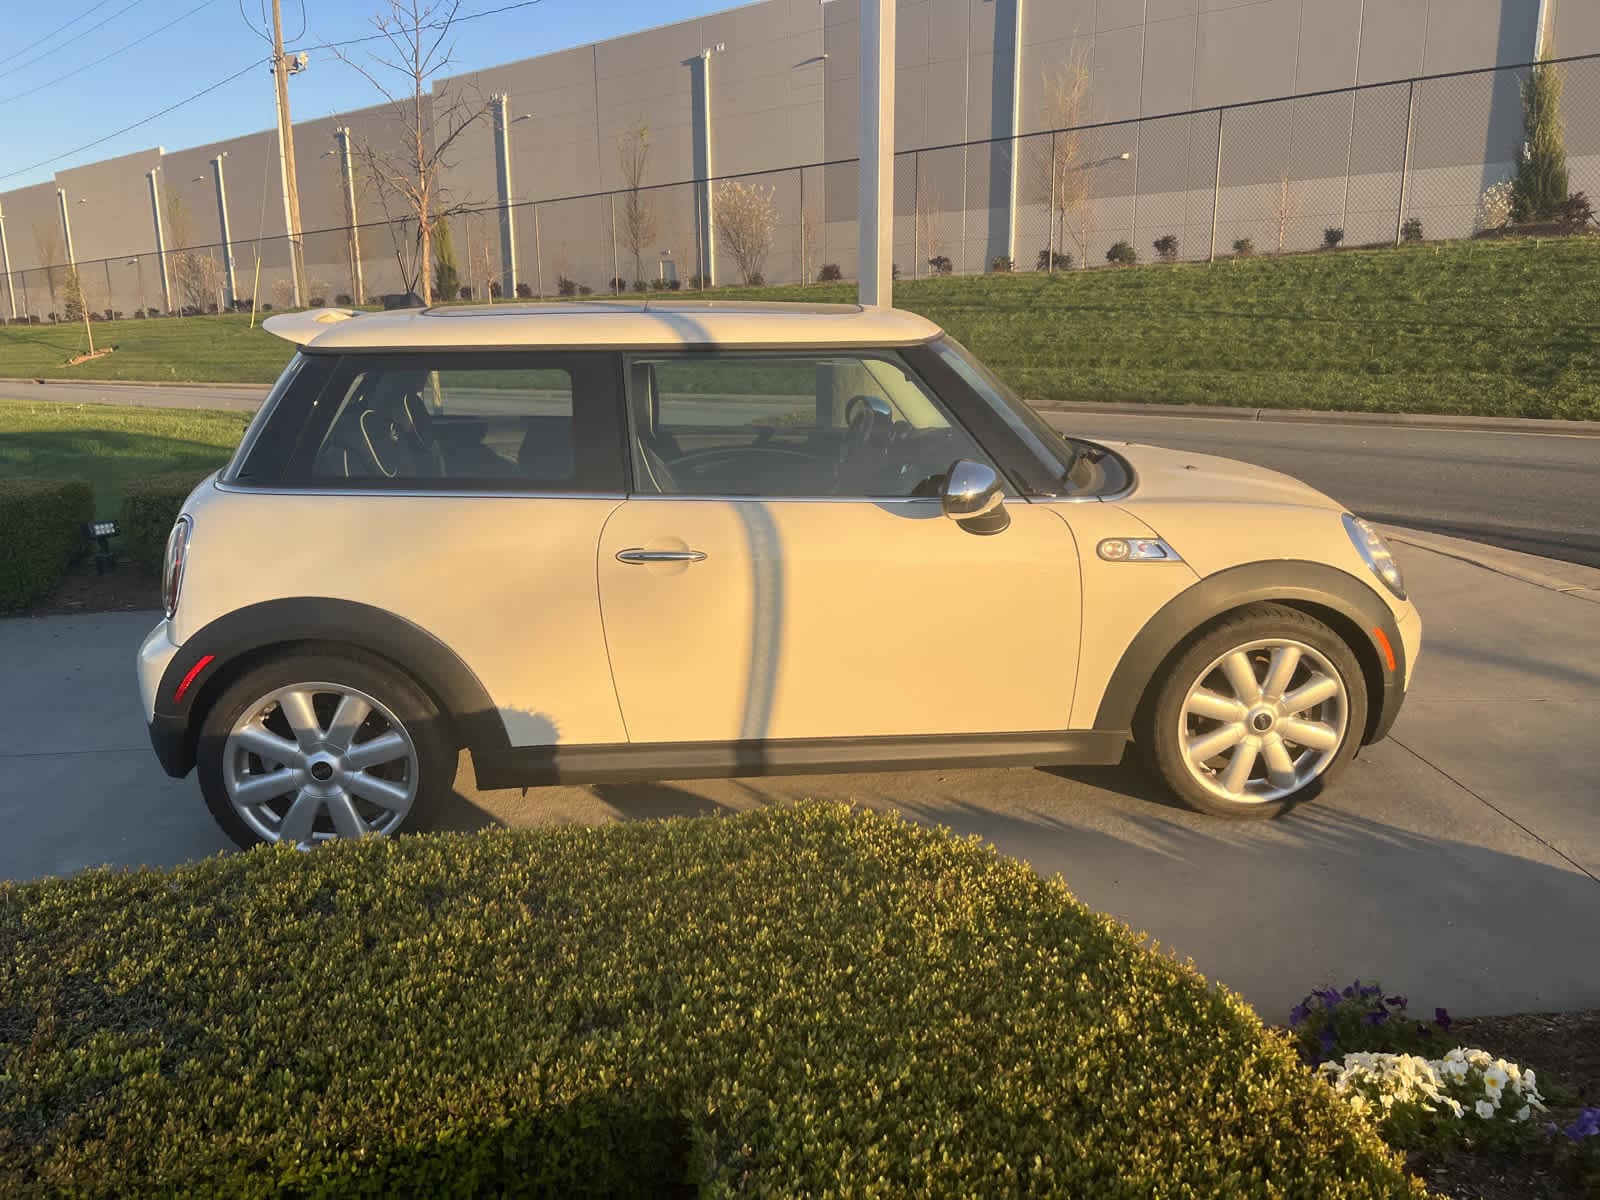 Used 2009 MINI Cooper S with VIN WMWMF73569TT97190 for sale in Concord, NC